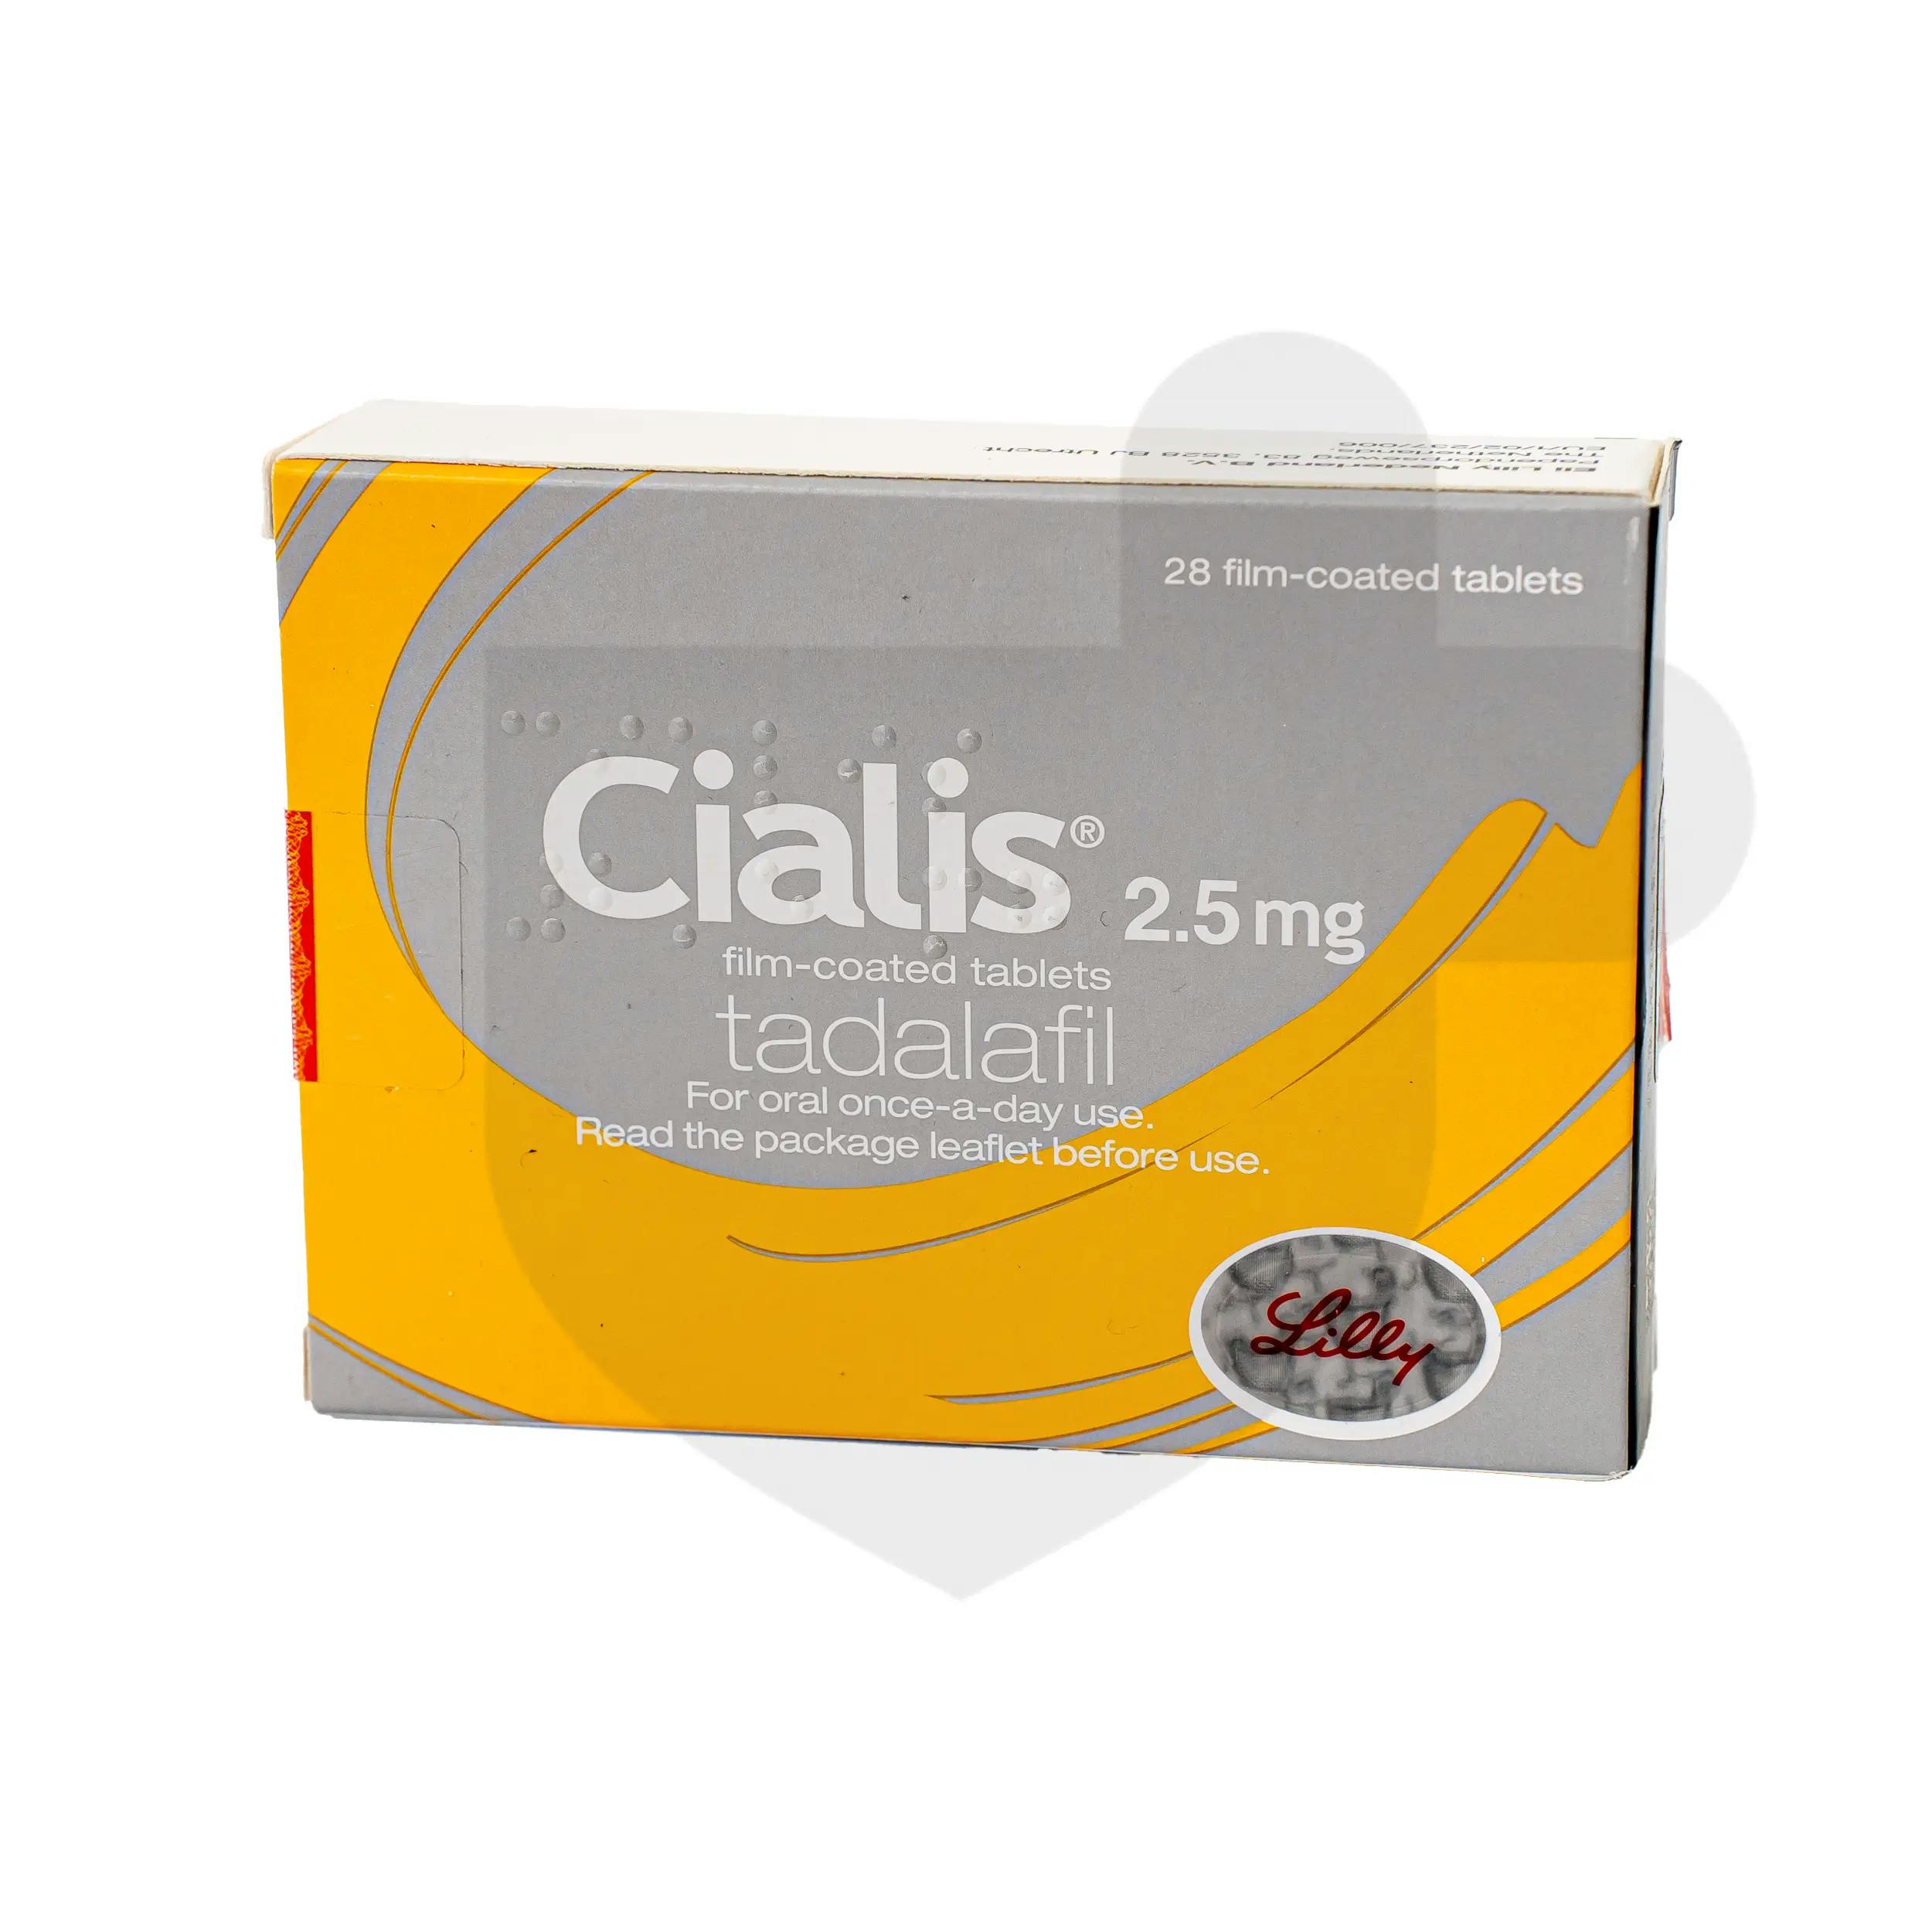 CIALIS <sup class="brand-mark">®</sup>